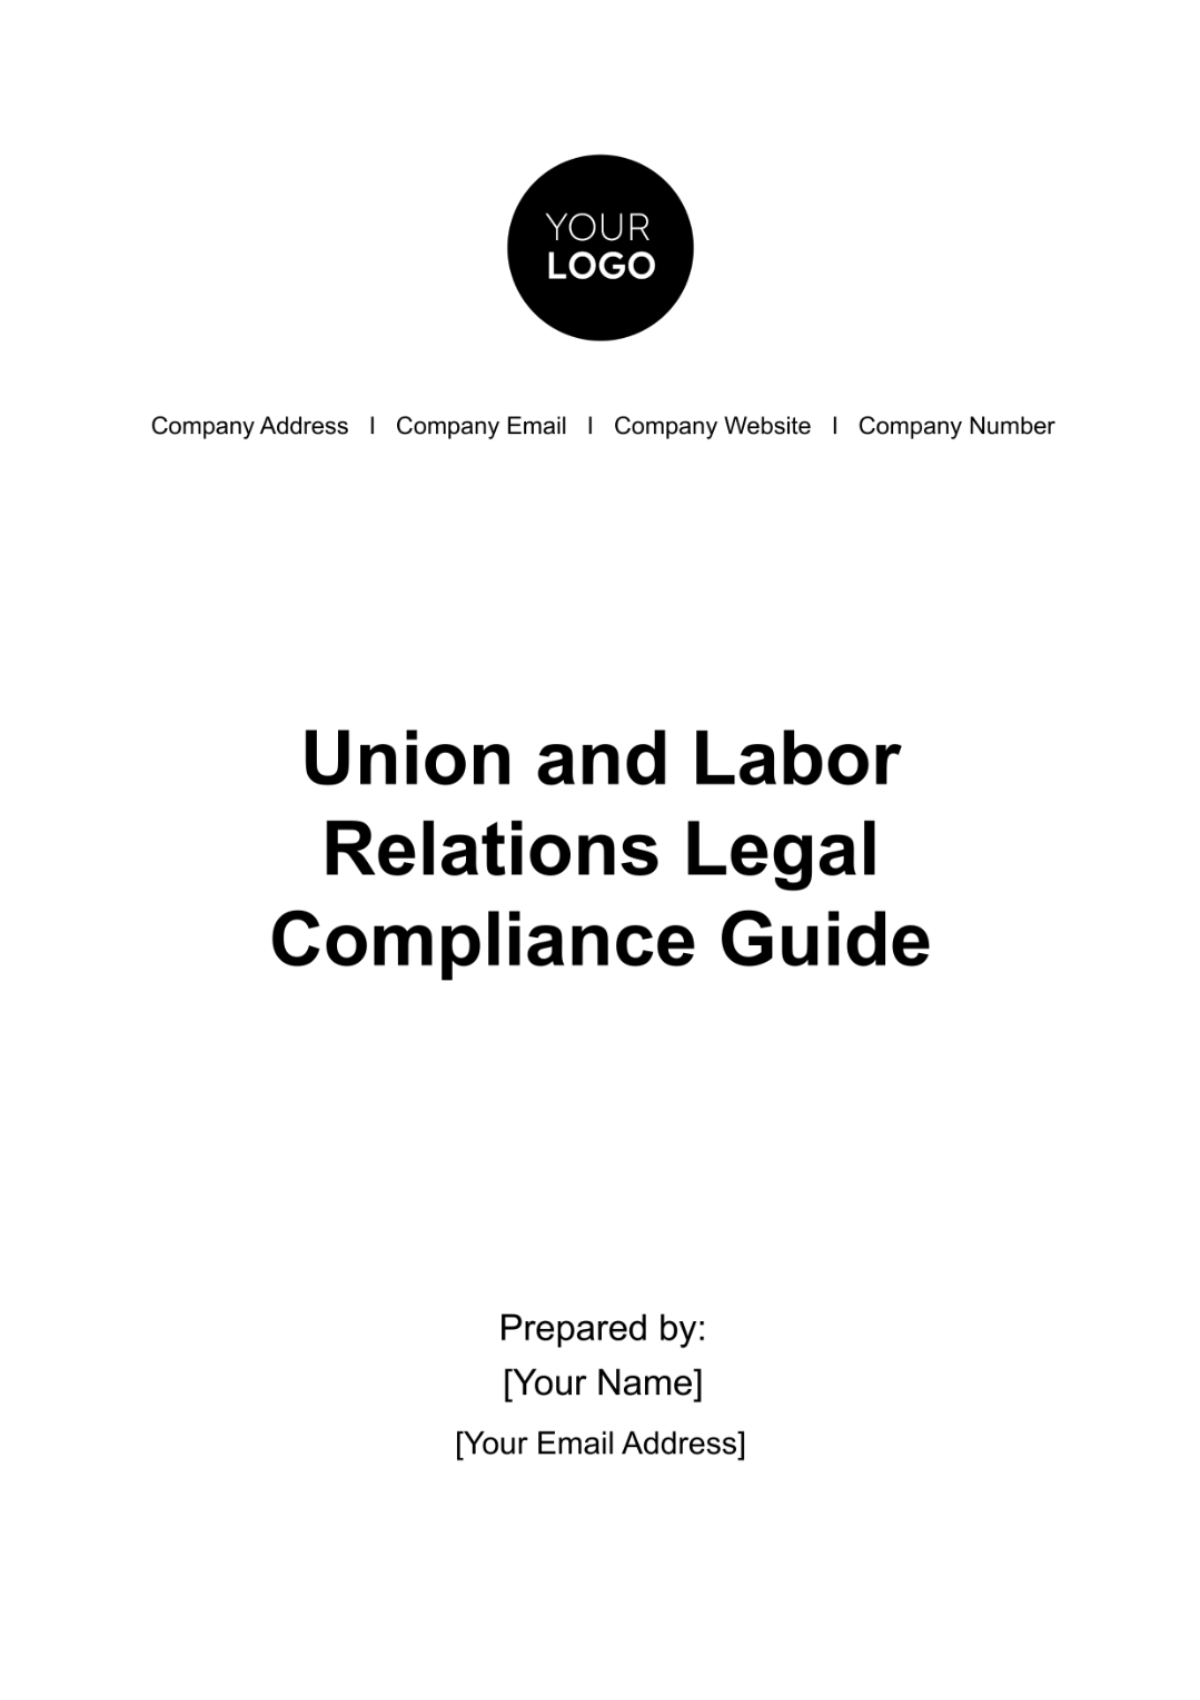 Free Union and Labor Relations Legal Compliance Guide HR Template